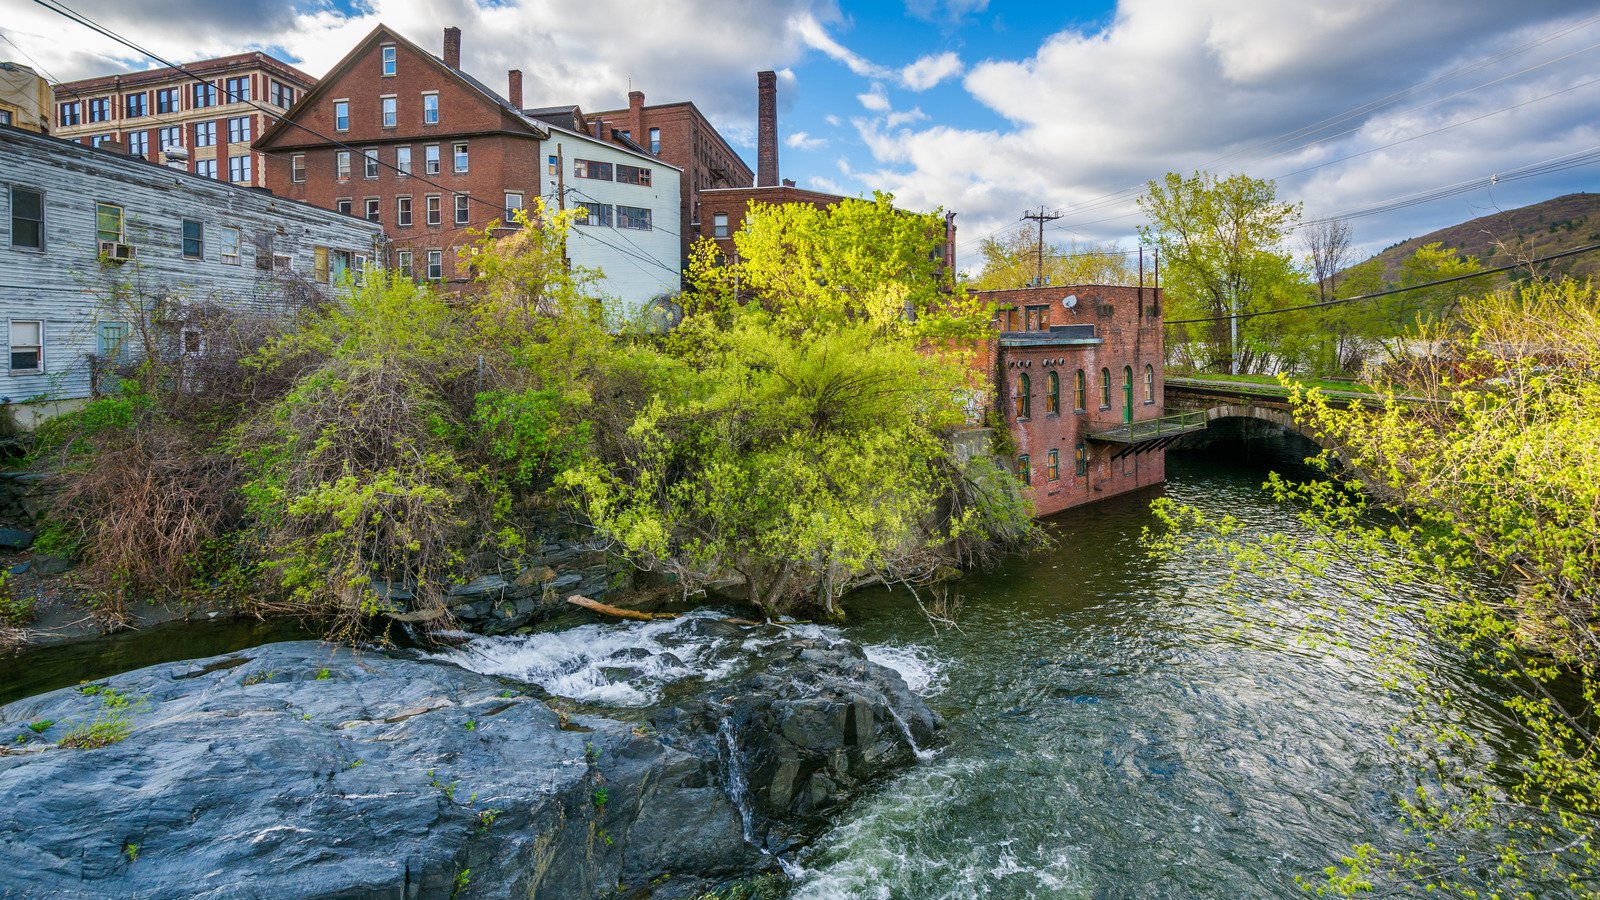 The Quirky Vermont Town That Makes For The Perfect New England Getaway